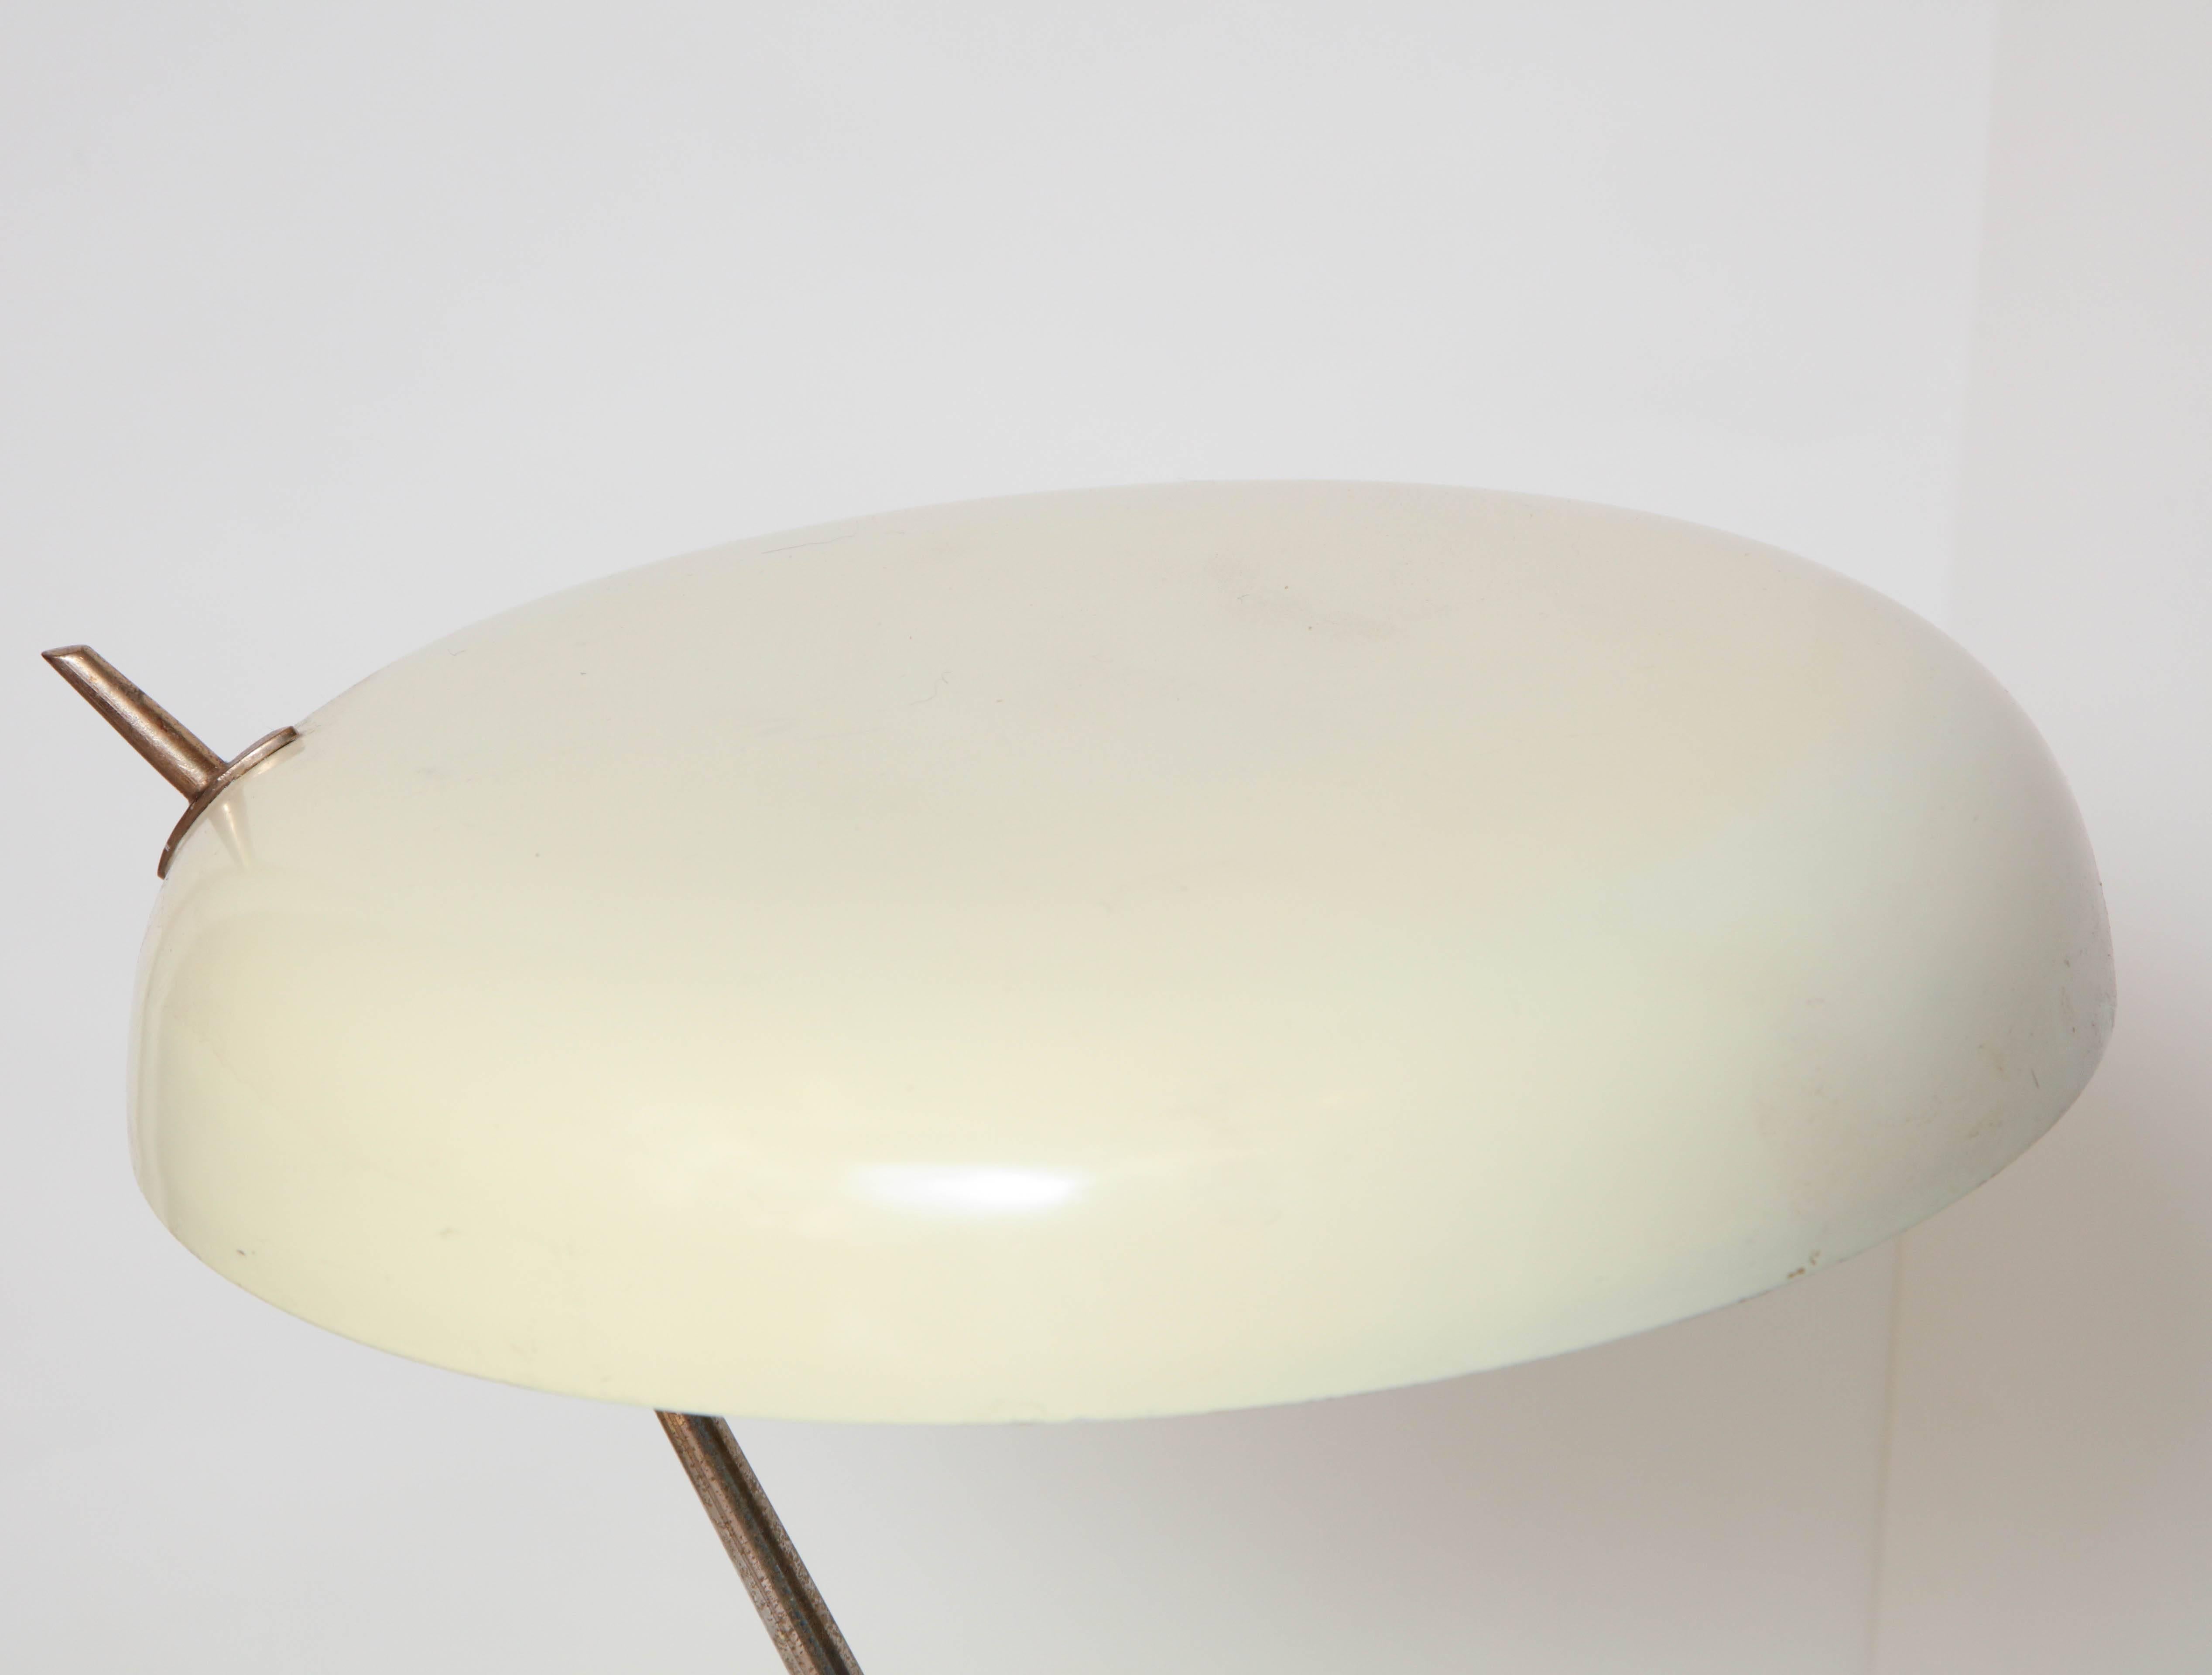 Mid-20th Century Articulated Table Lamp Attributed to Arredoluce Italian Mid-Century Modern, 1950